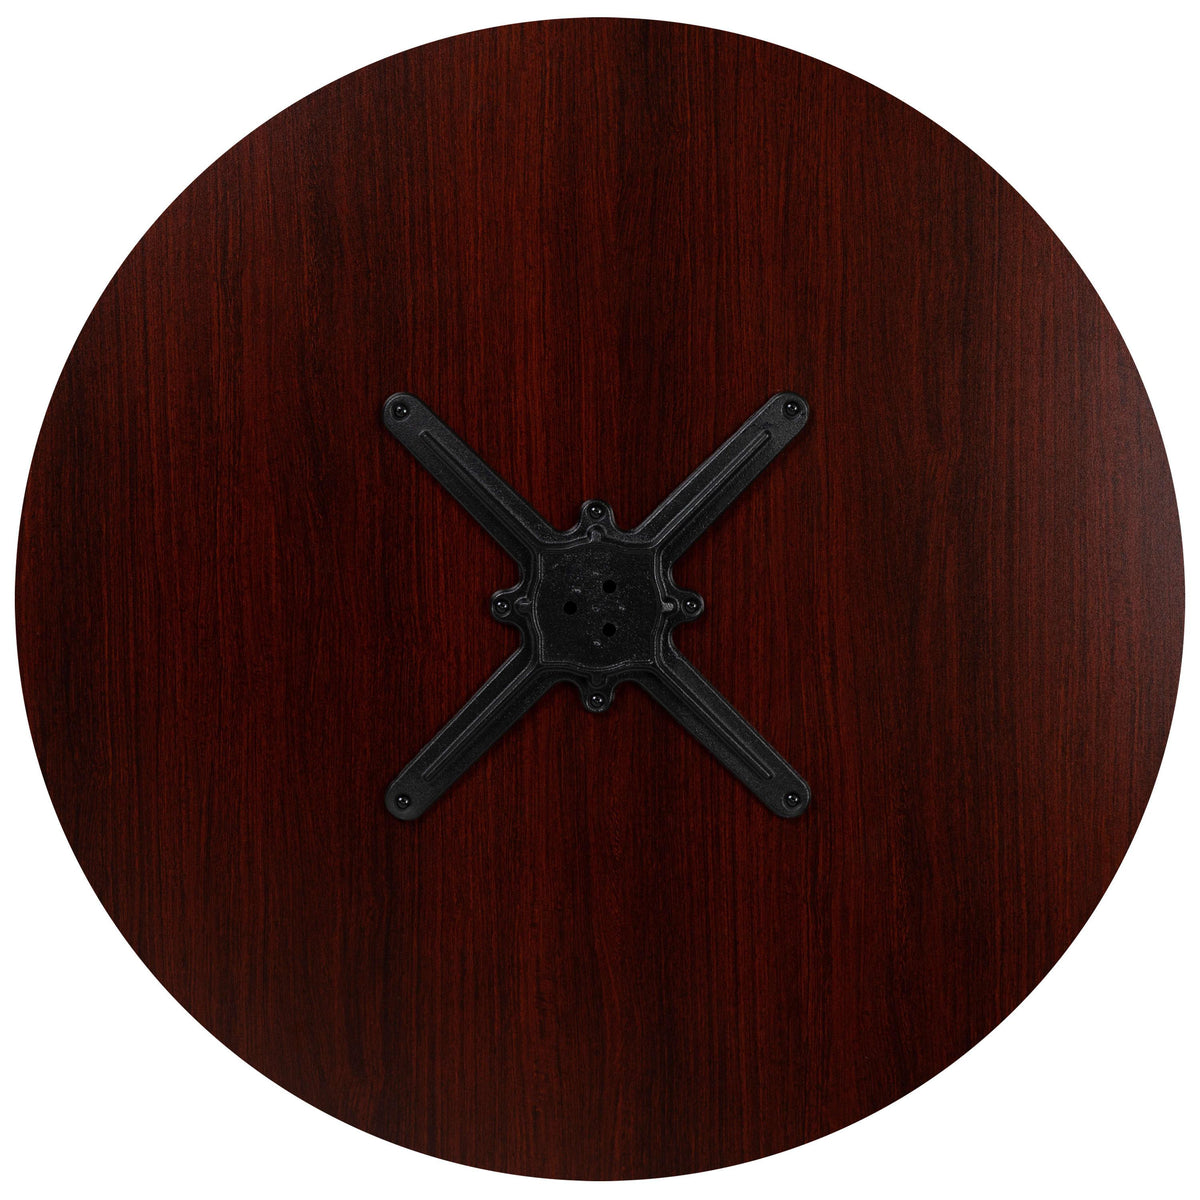 Mahogany |#| 36inch Round Multi-Purpose Conference Table in Mahogany - Meeting Table for Office